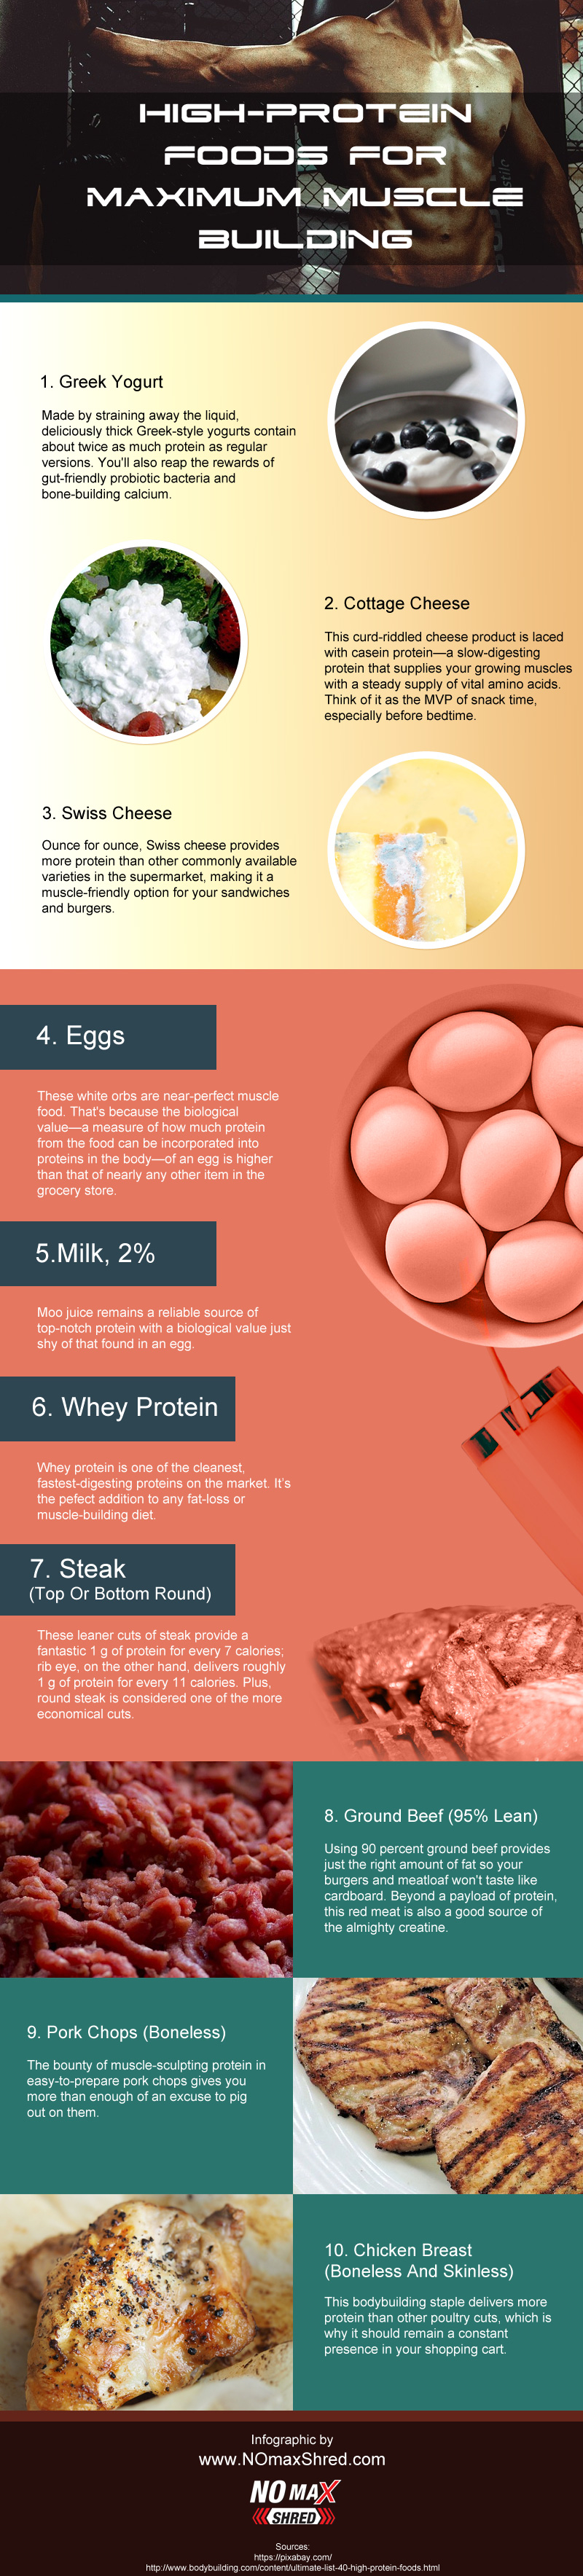 High Protein Foods For Muscle Building